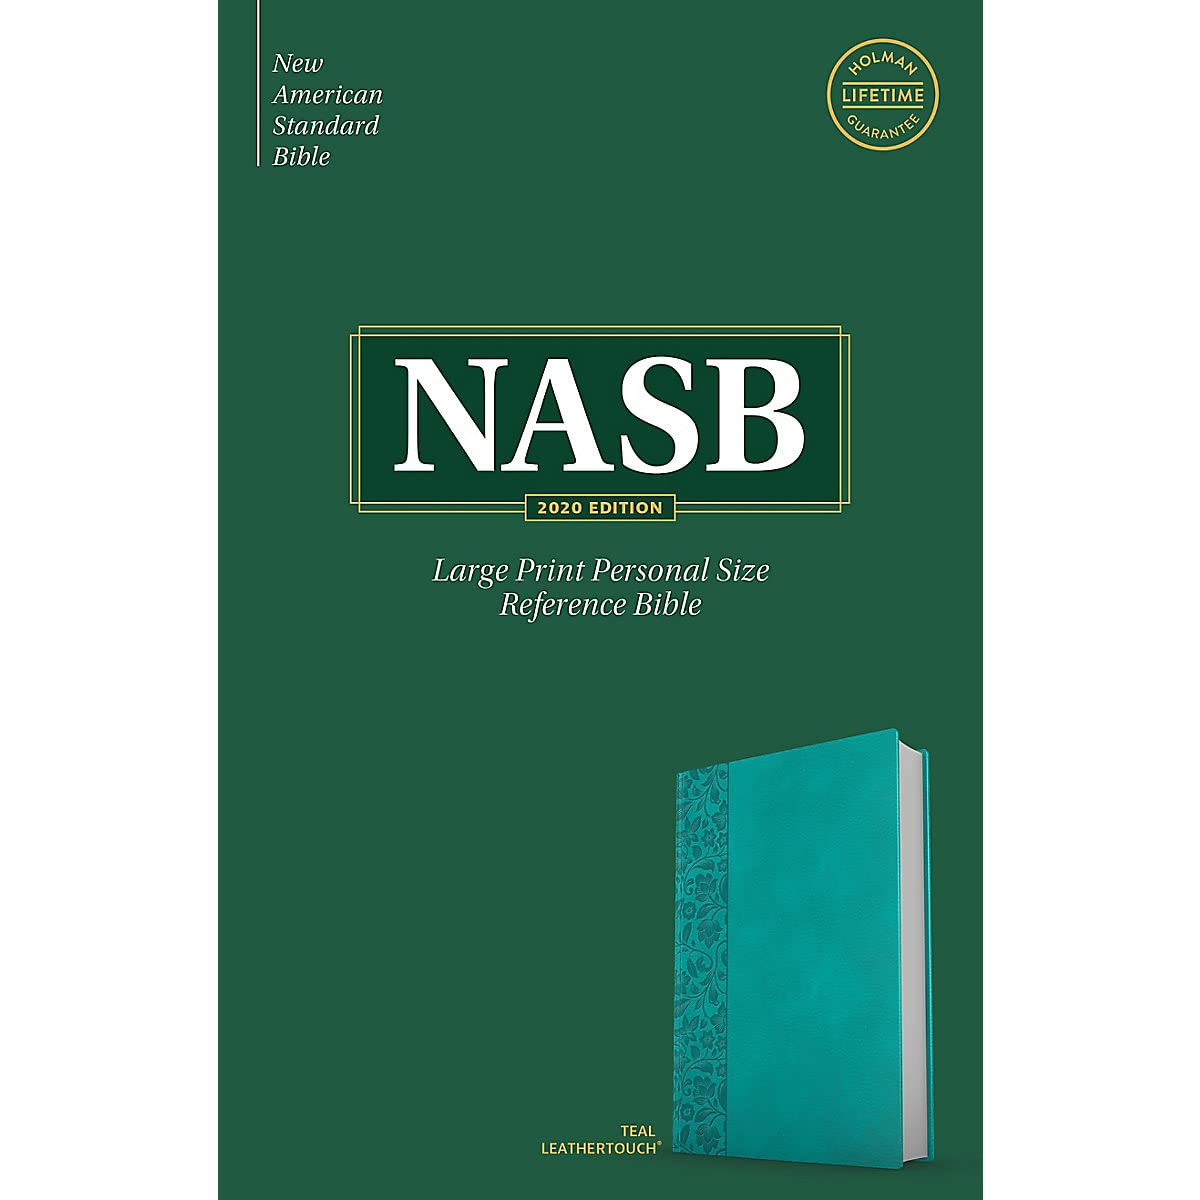 NASB Large Print Personal Size Reference Bible, Teal LeatherTouch, Red Letter, Presentation Page, Cross-References, Full-Color Maps, Easy-to-Read Bible Karmina Type